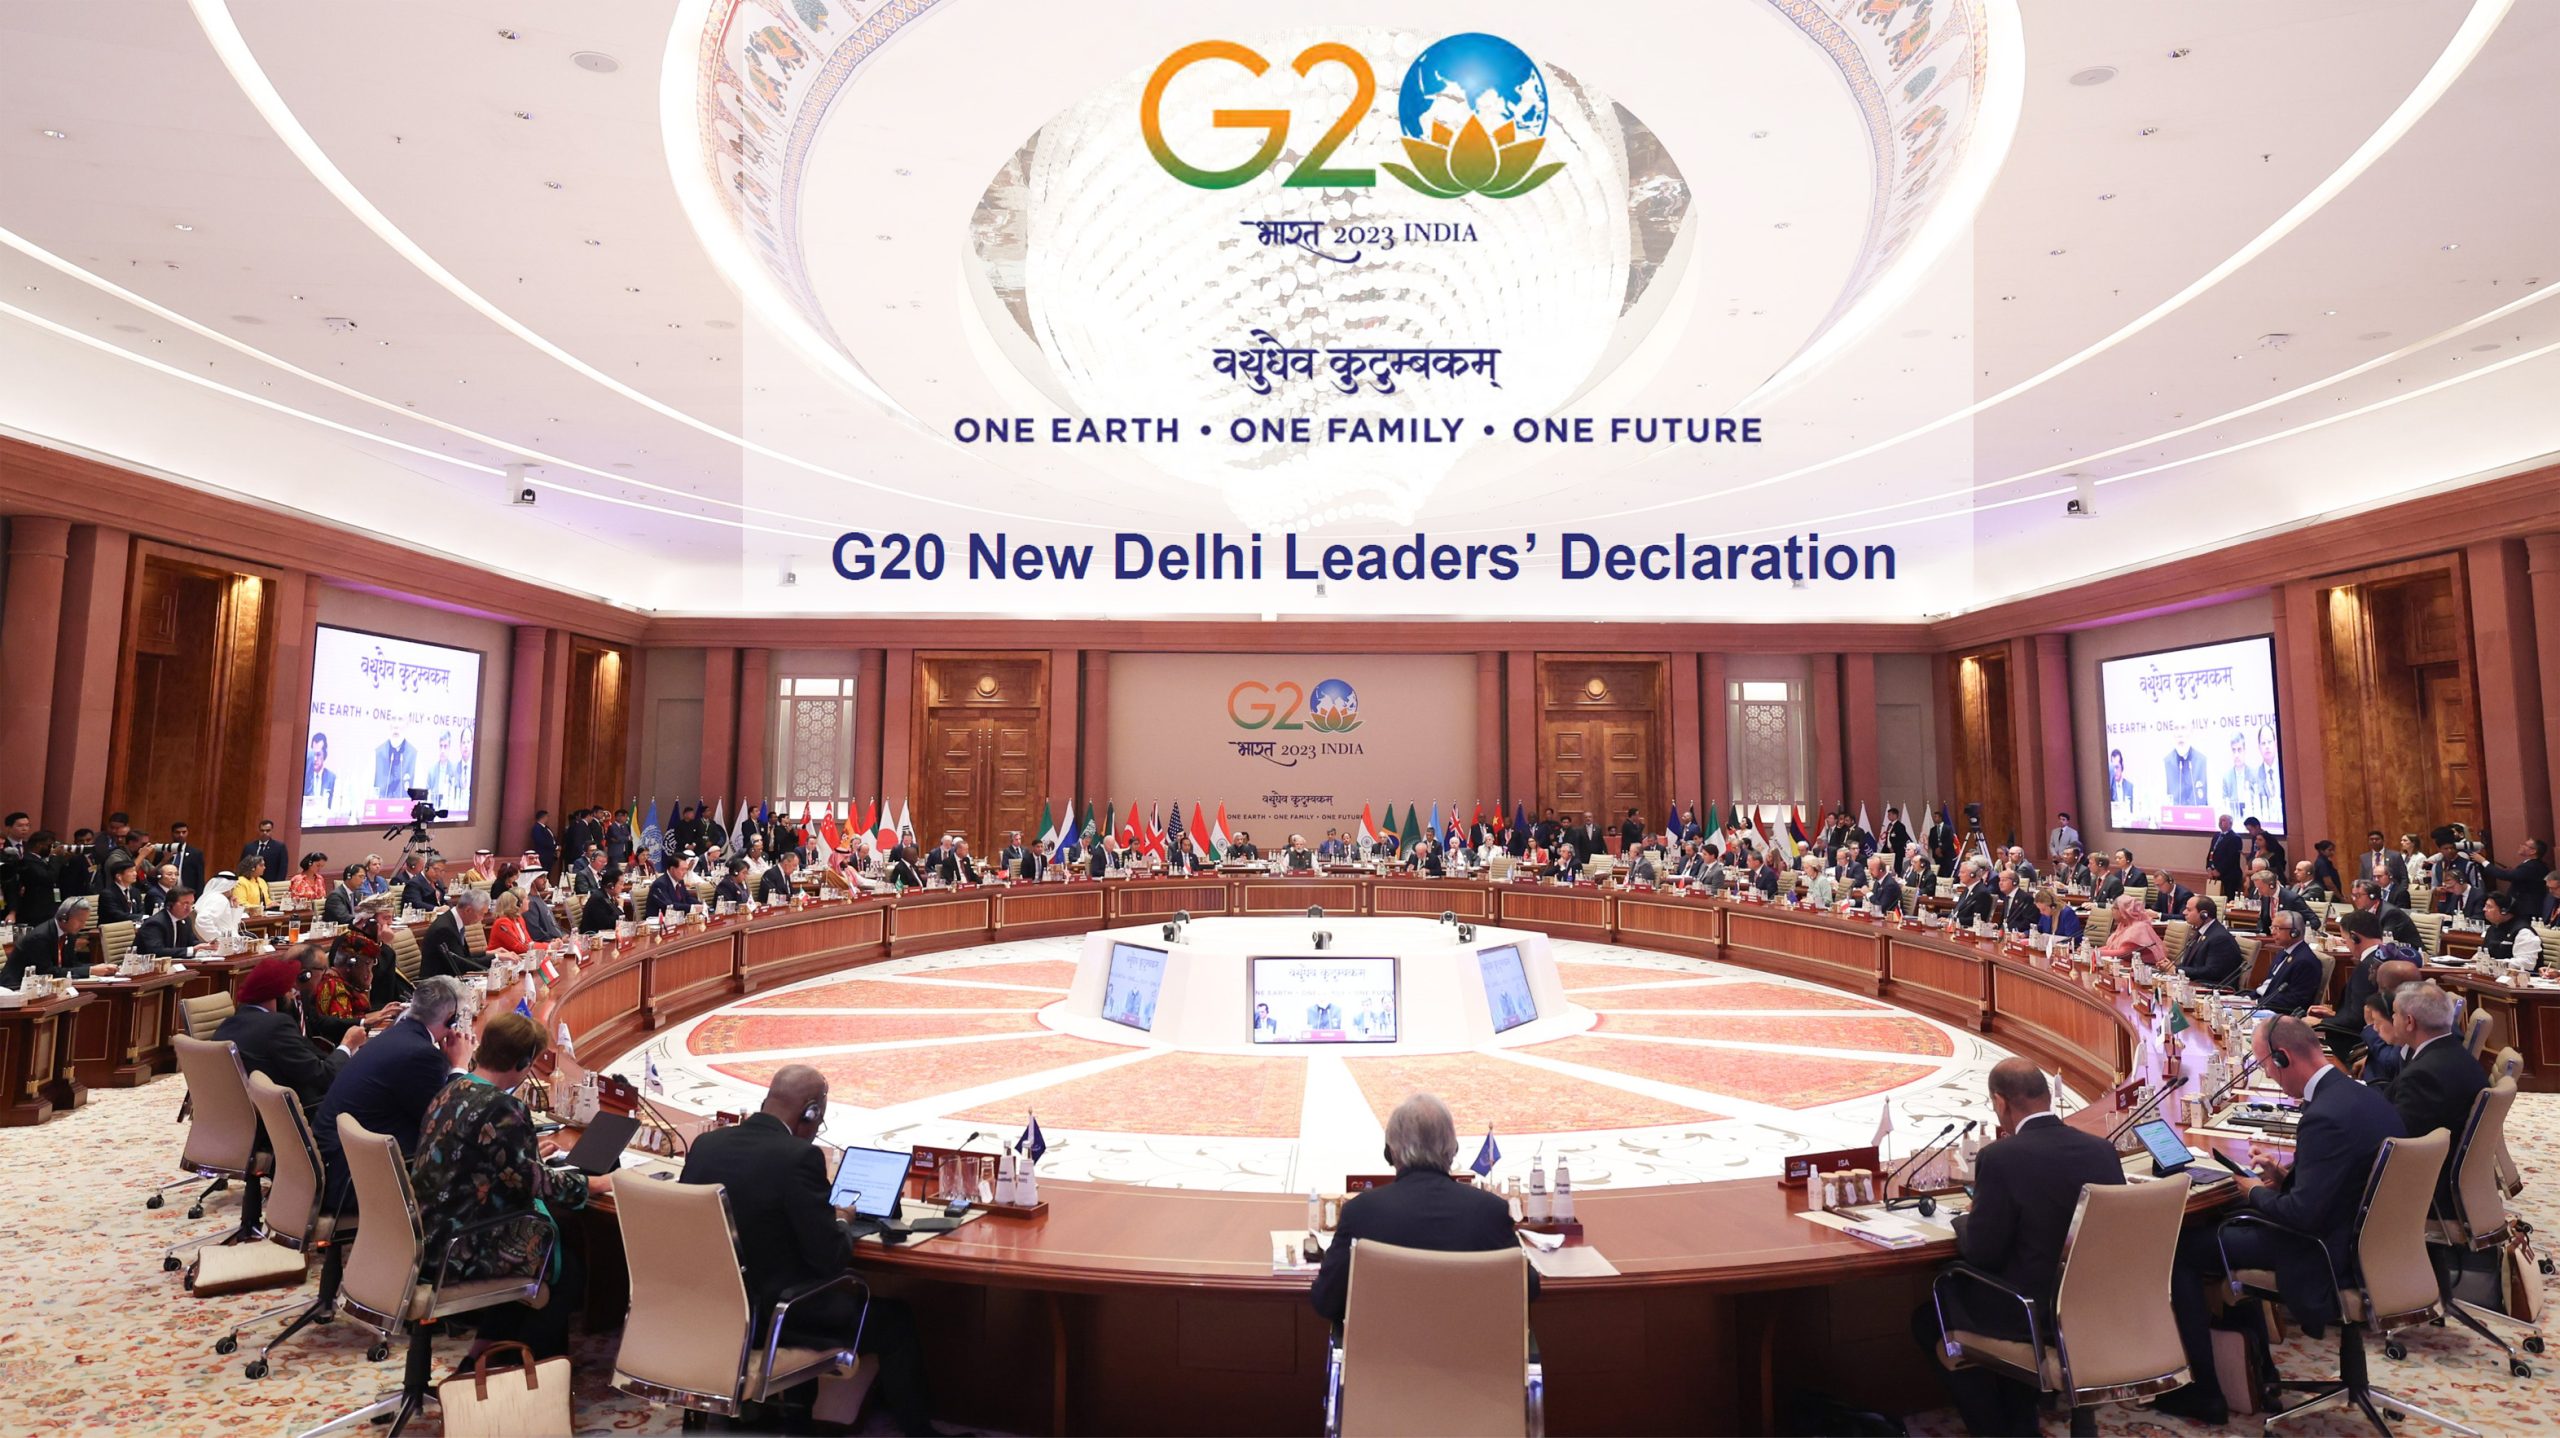 G20 New Delhi Leaders' Declaration released: Read details and full text